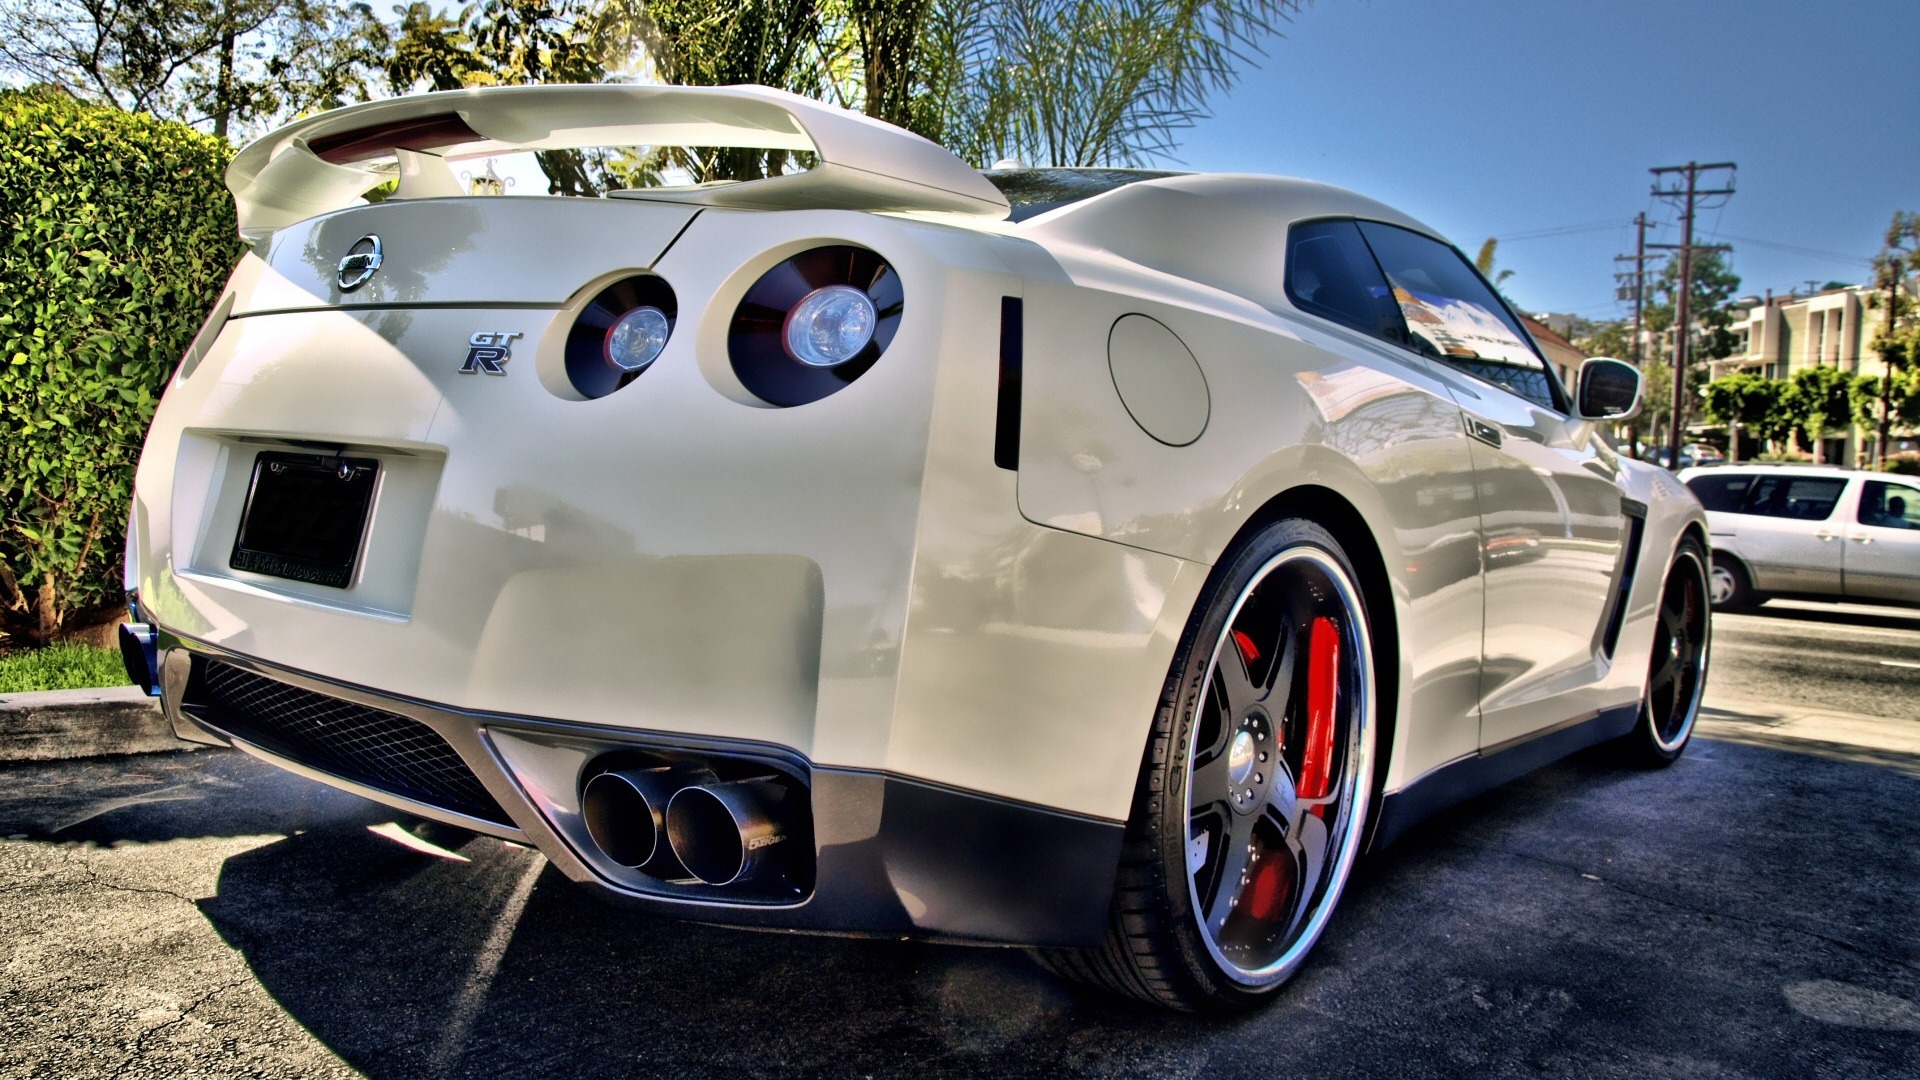 Awesome Nissan Car Pixels Full HD Wallpaper Pack Tech Bug